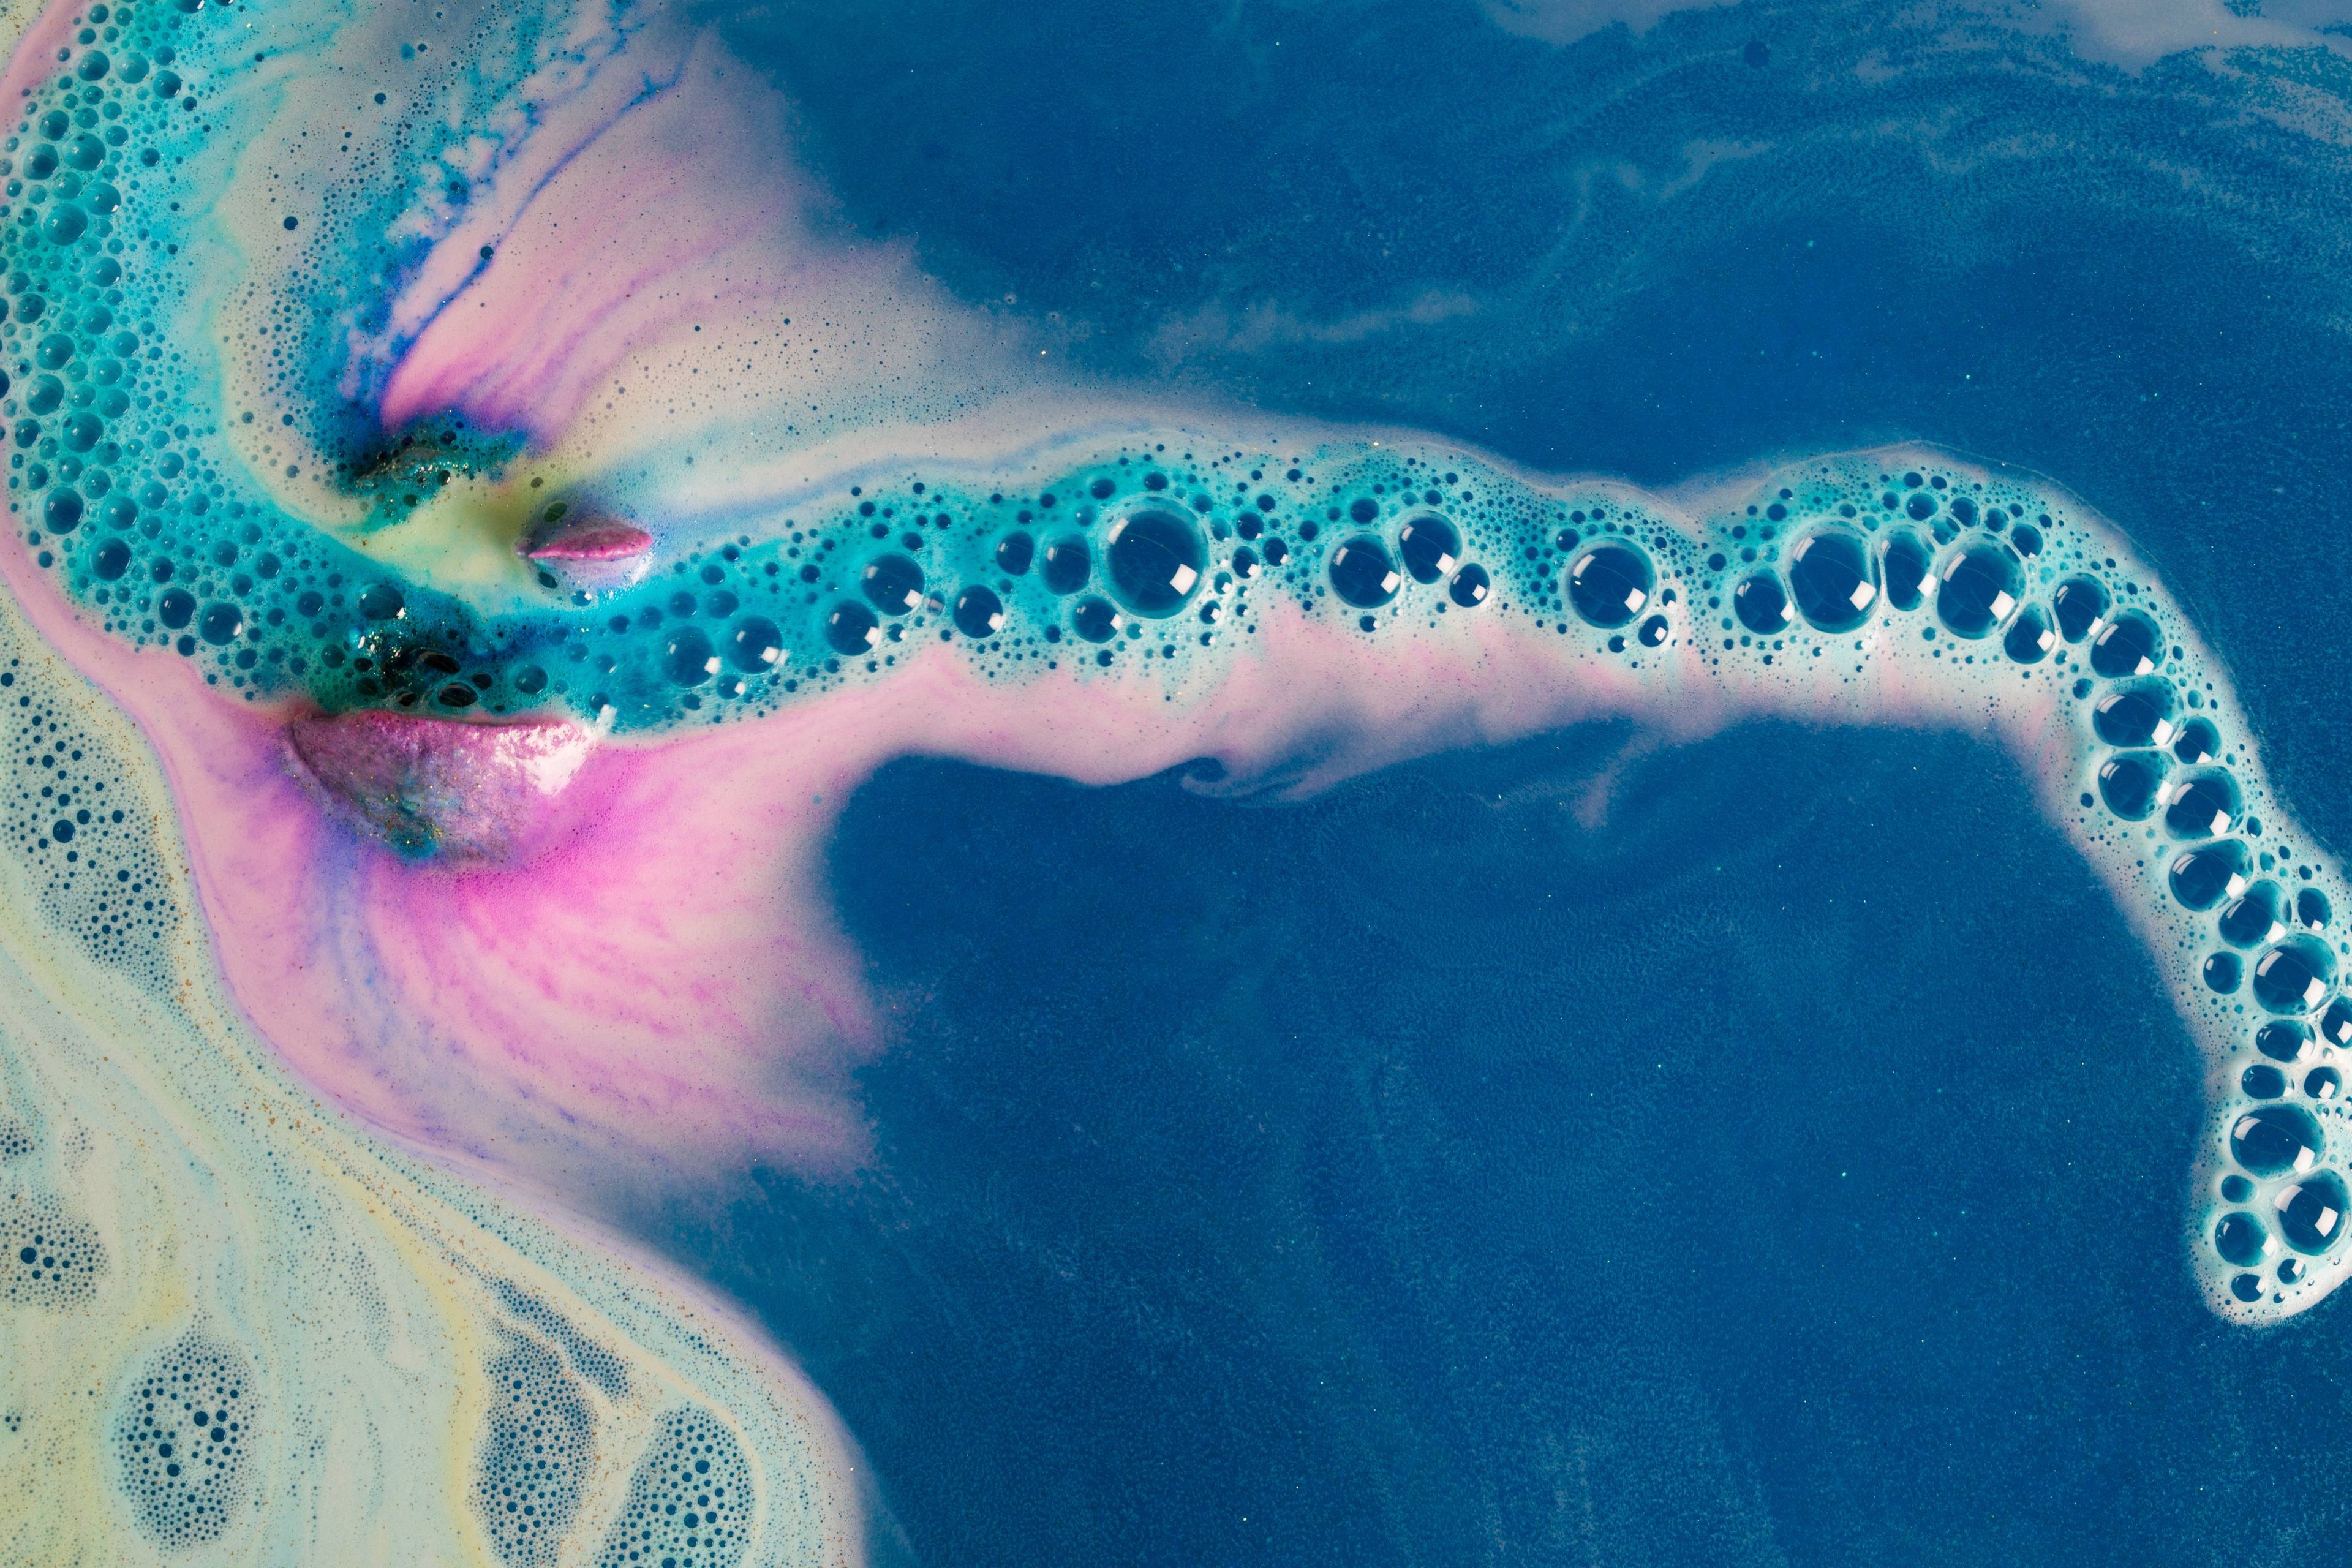 The Intergalactic bath bomb slowly fizzing, creating a solar system of bubbles with pink and blue swirls and hunts of yellow.